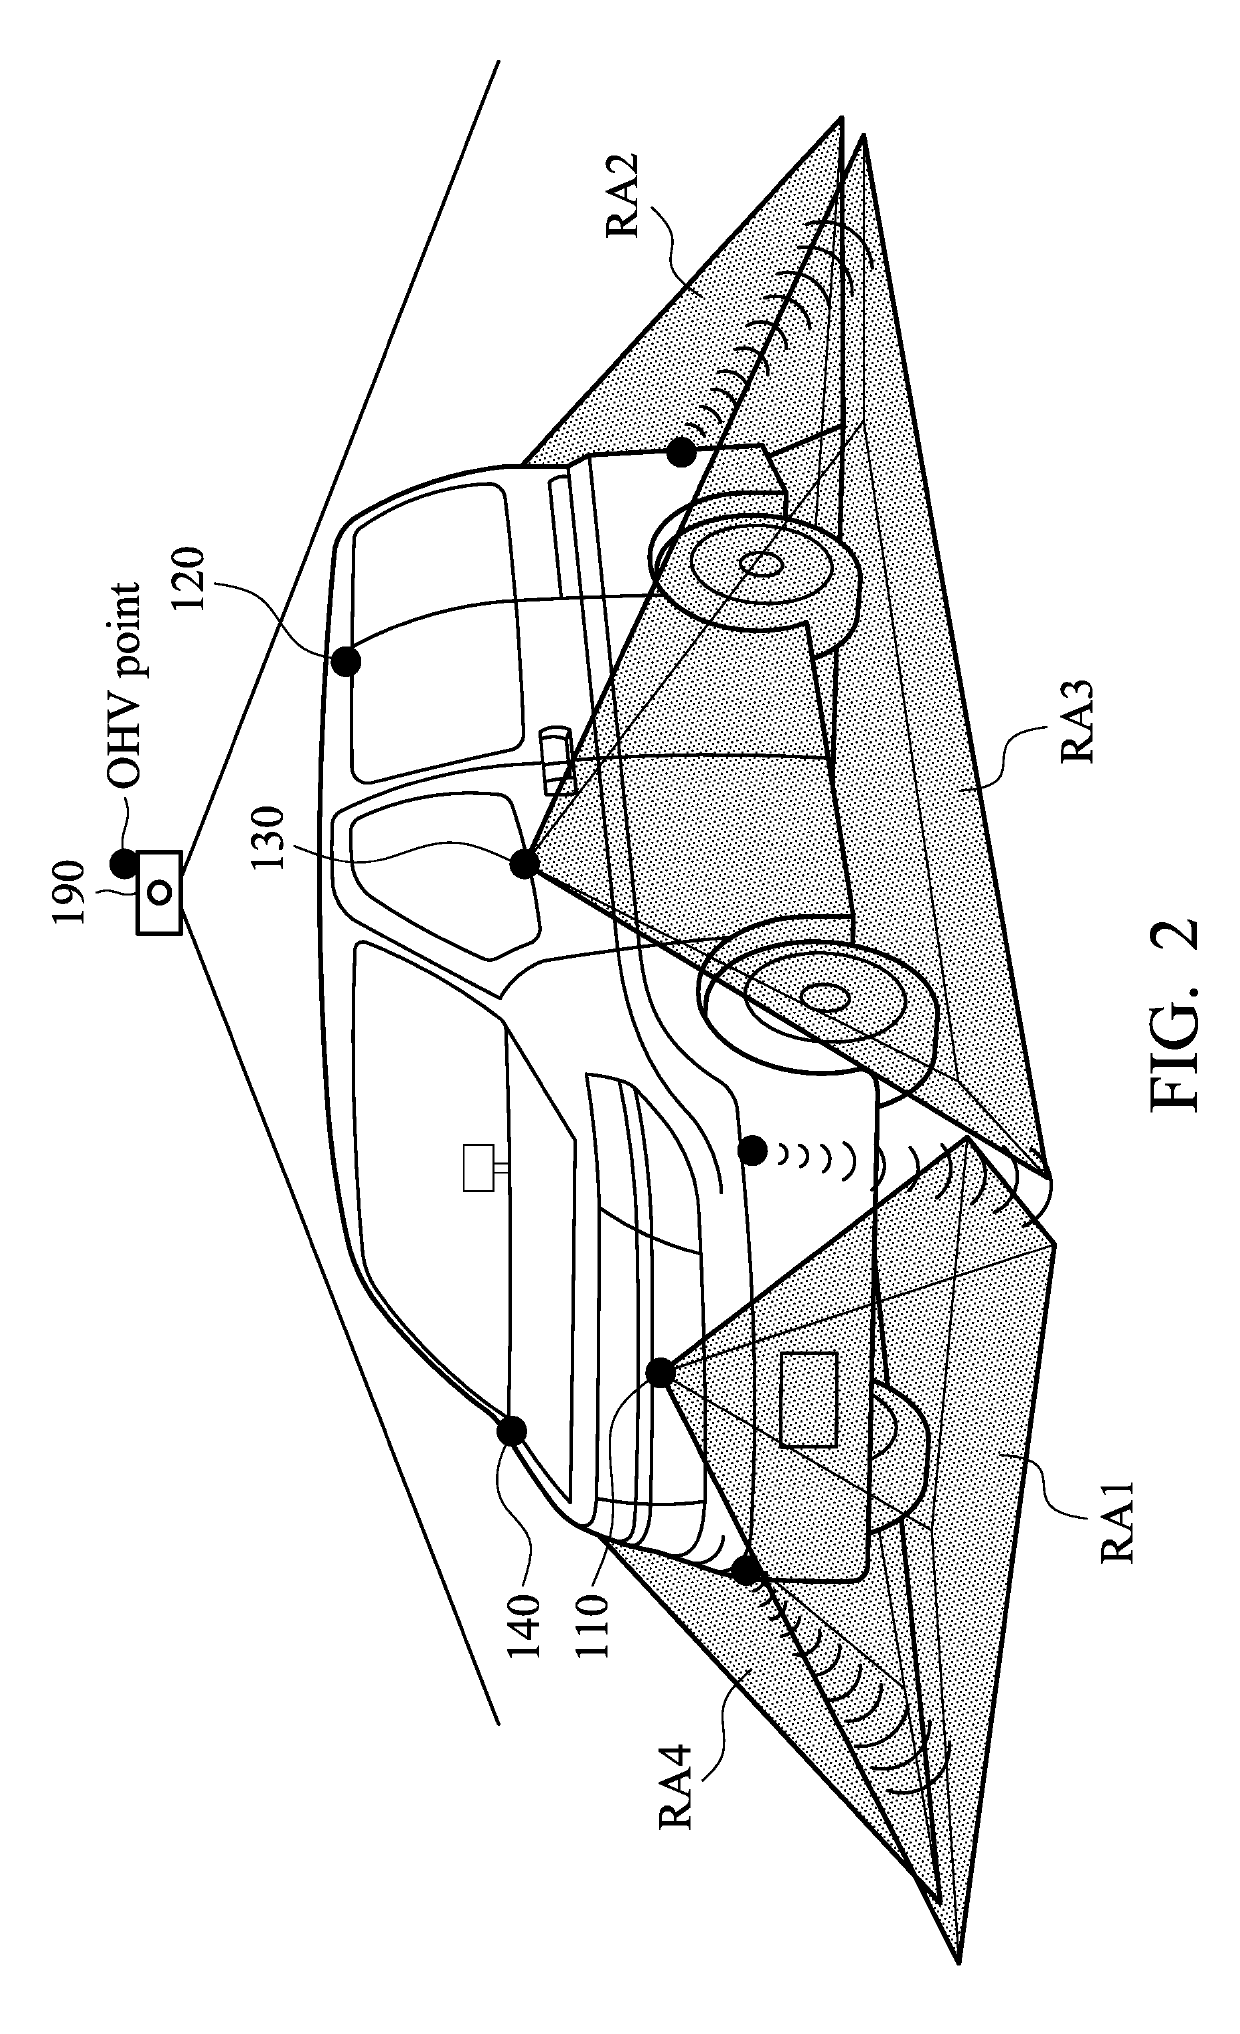 Around view monitoring systems for vehicle and calibration methods for calibrating image capture devices of an around view monitoring system using the same